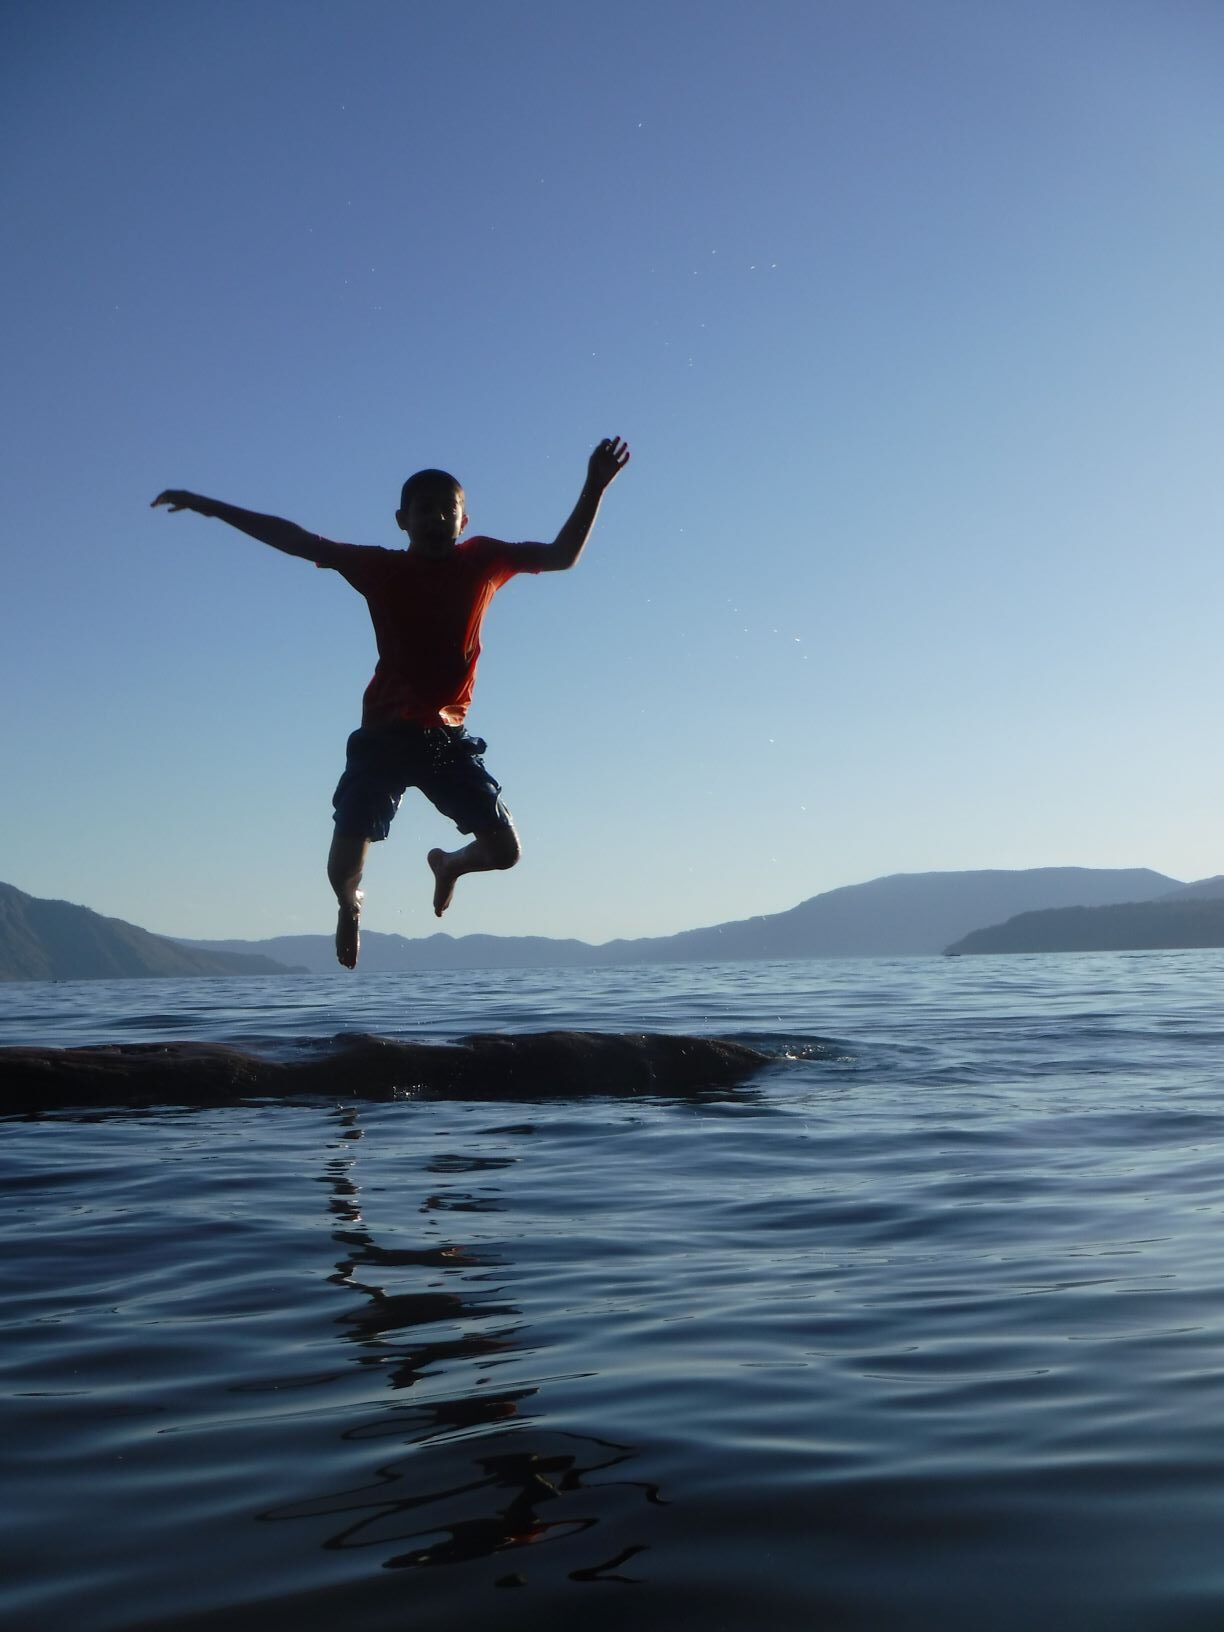 A boy jumping off a log floating in Lake Pend Oreille, with a view of hills in the far background.